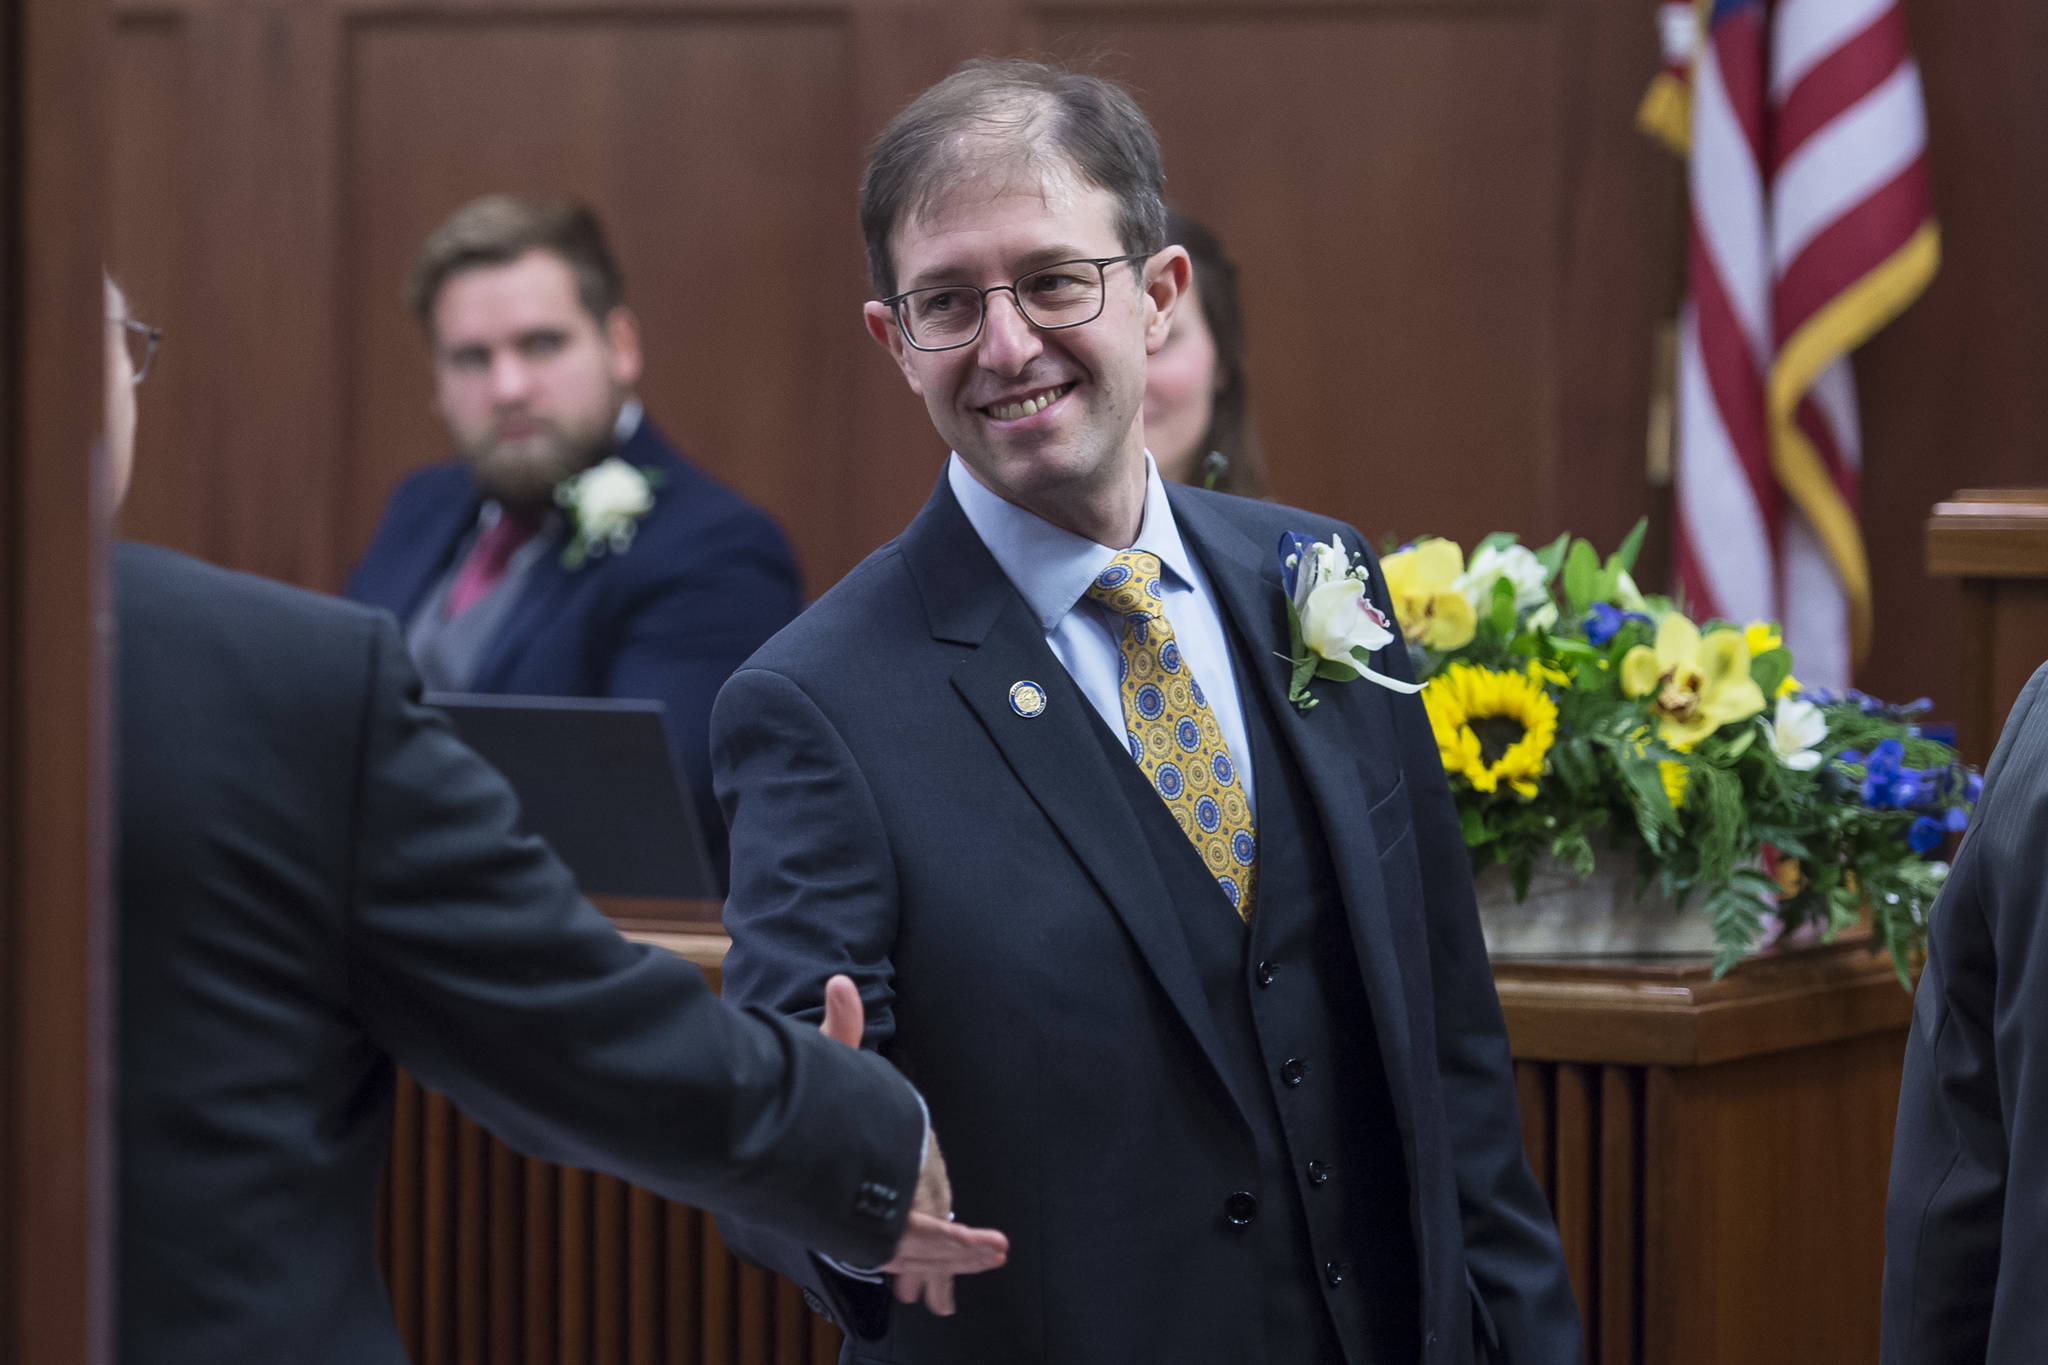 Sen. Jesse Kiehl is congratulated after being sworn in on the opening day of the 31st Session of the Alaska Legislature on Tuesday, Jan. 15, 2019. (Michael Penn | Juneau Empire)